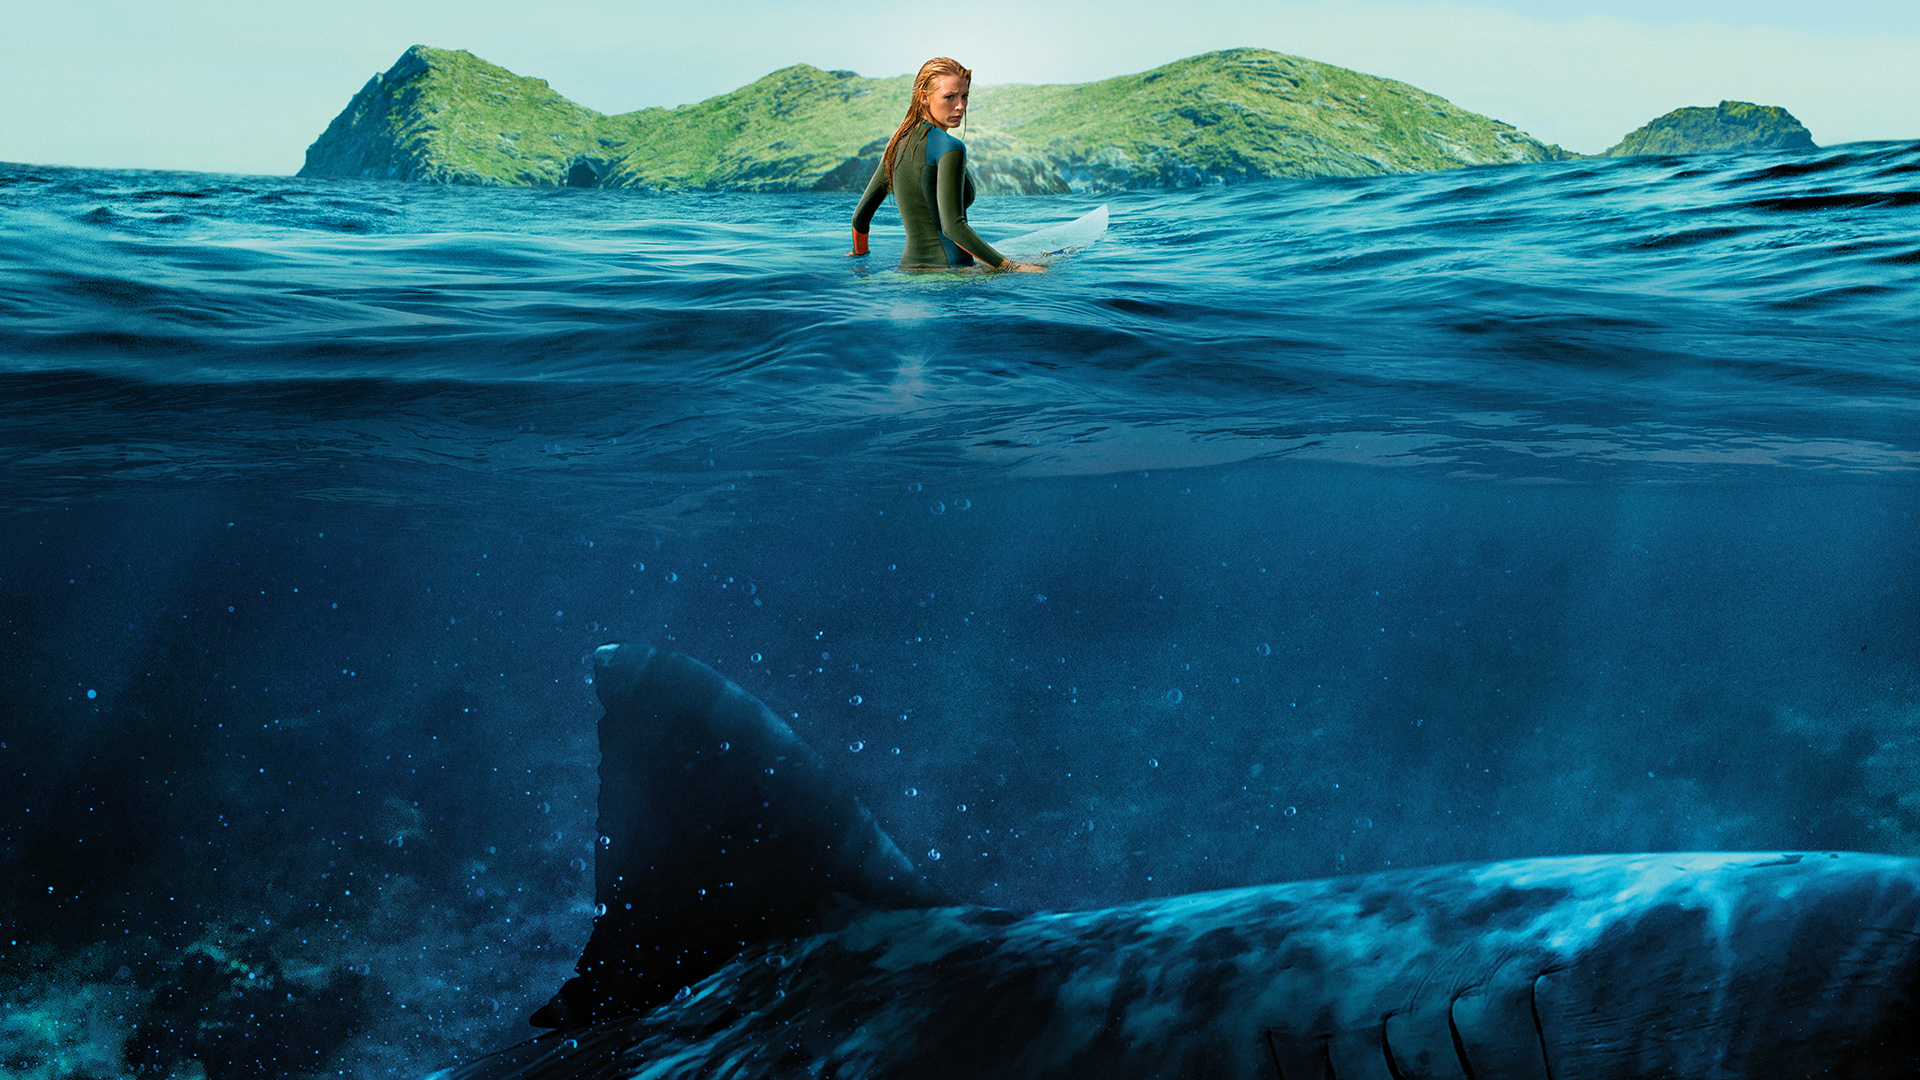 The Shallows Wallpapers